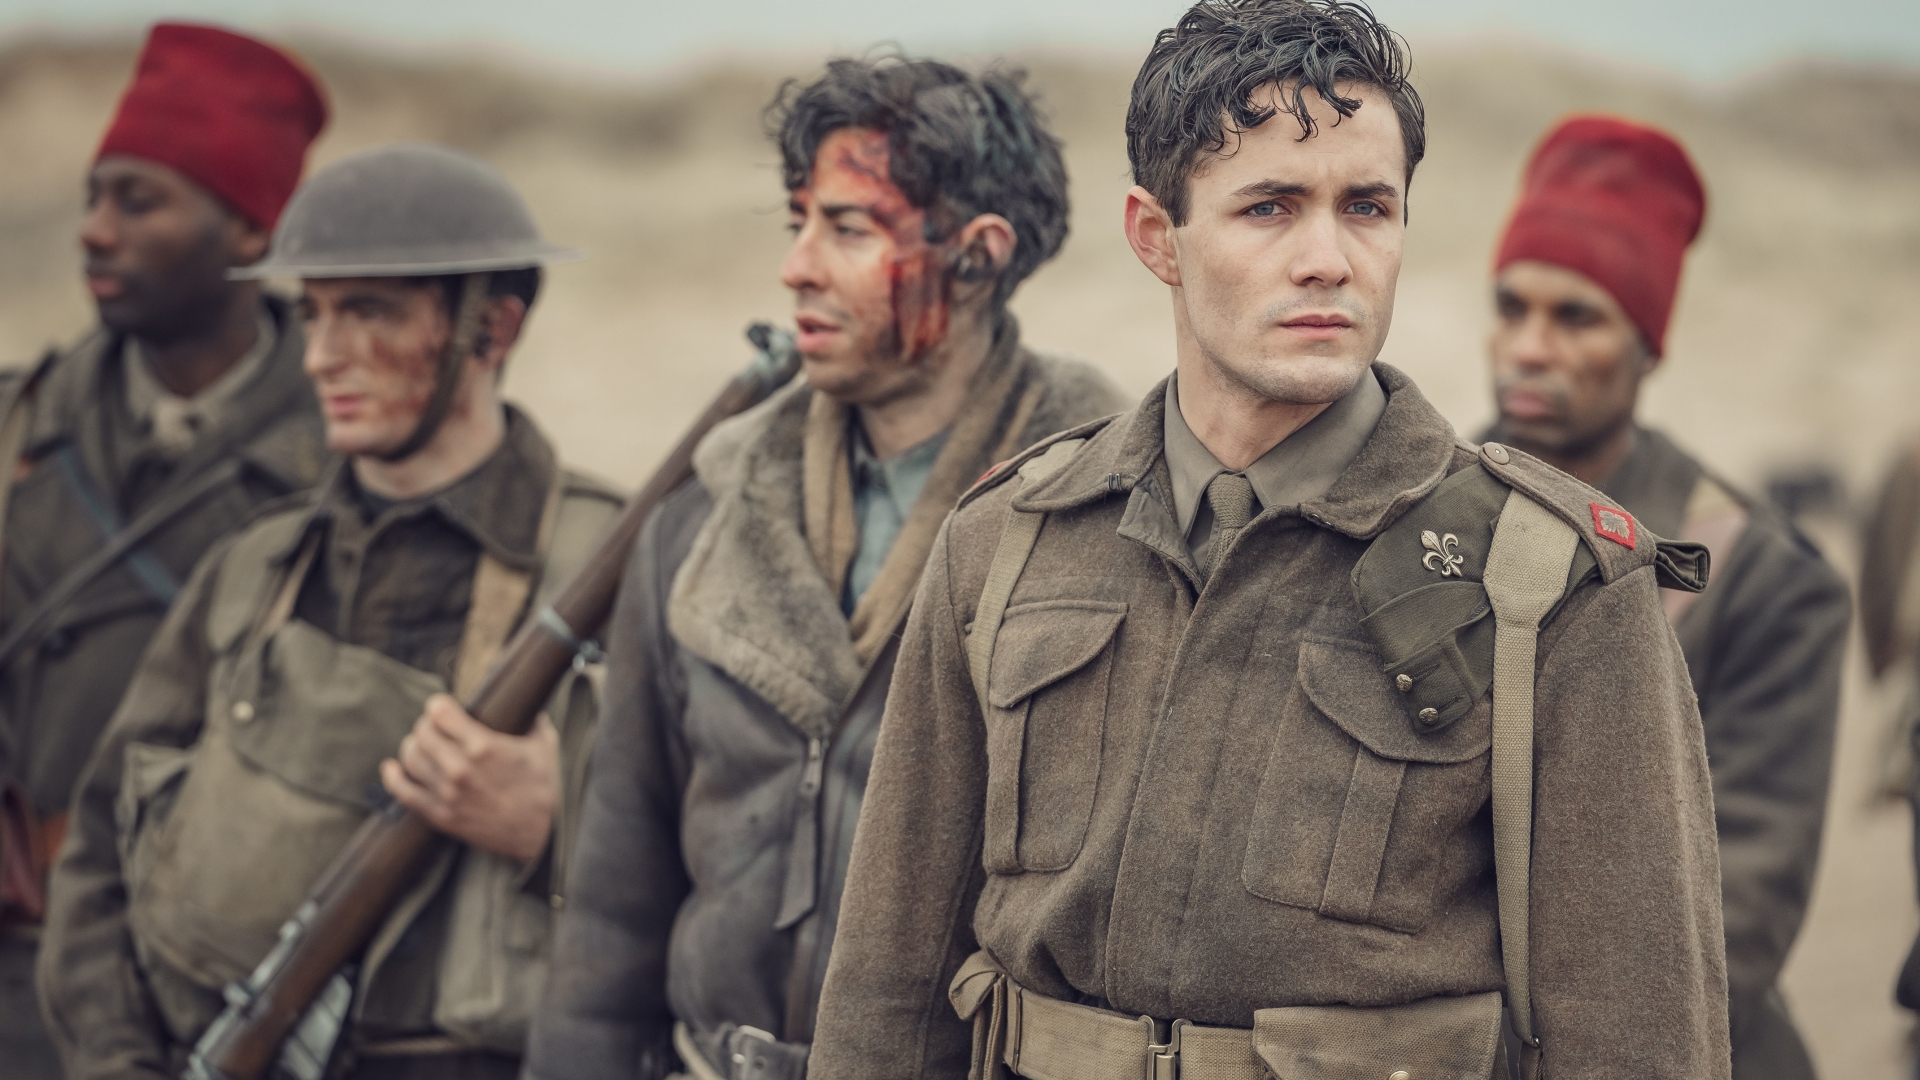 BBC Drama portraying Britain as racist during WWII is the latest bizarre twist in Beeb’s culture war